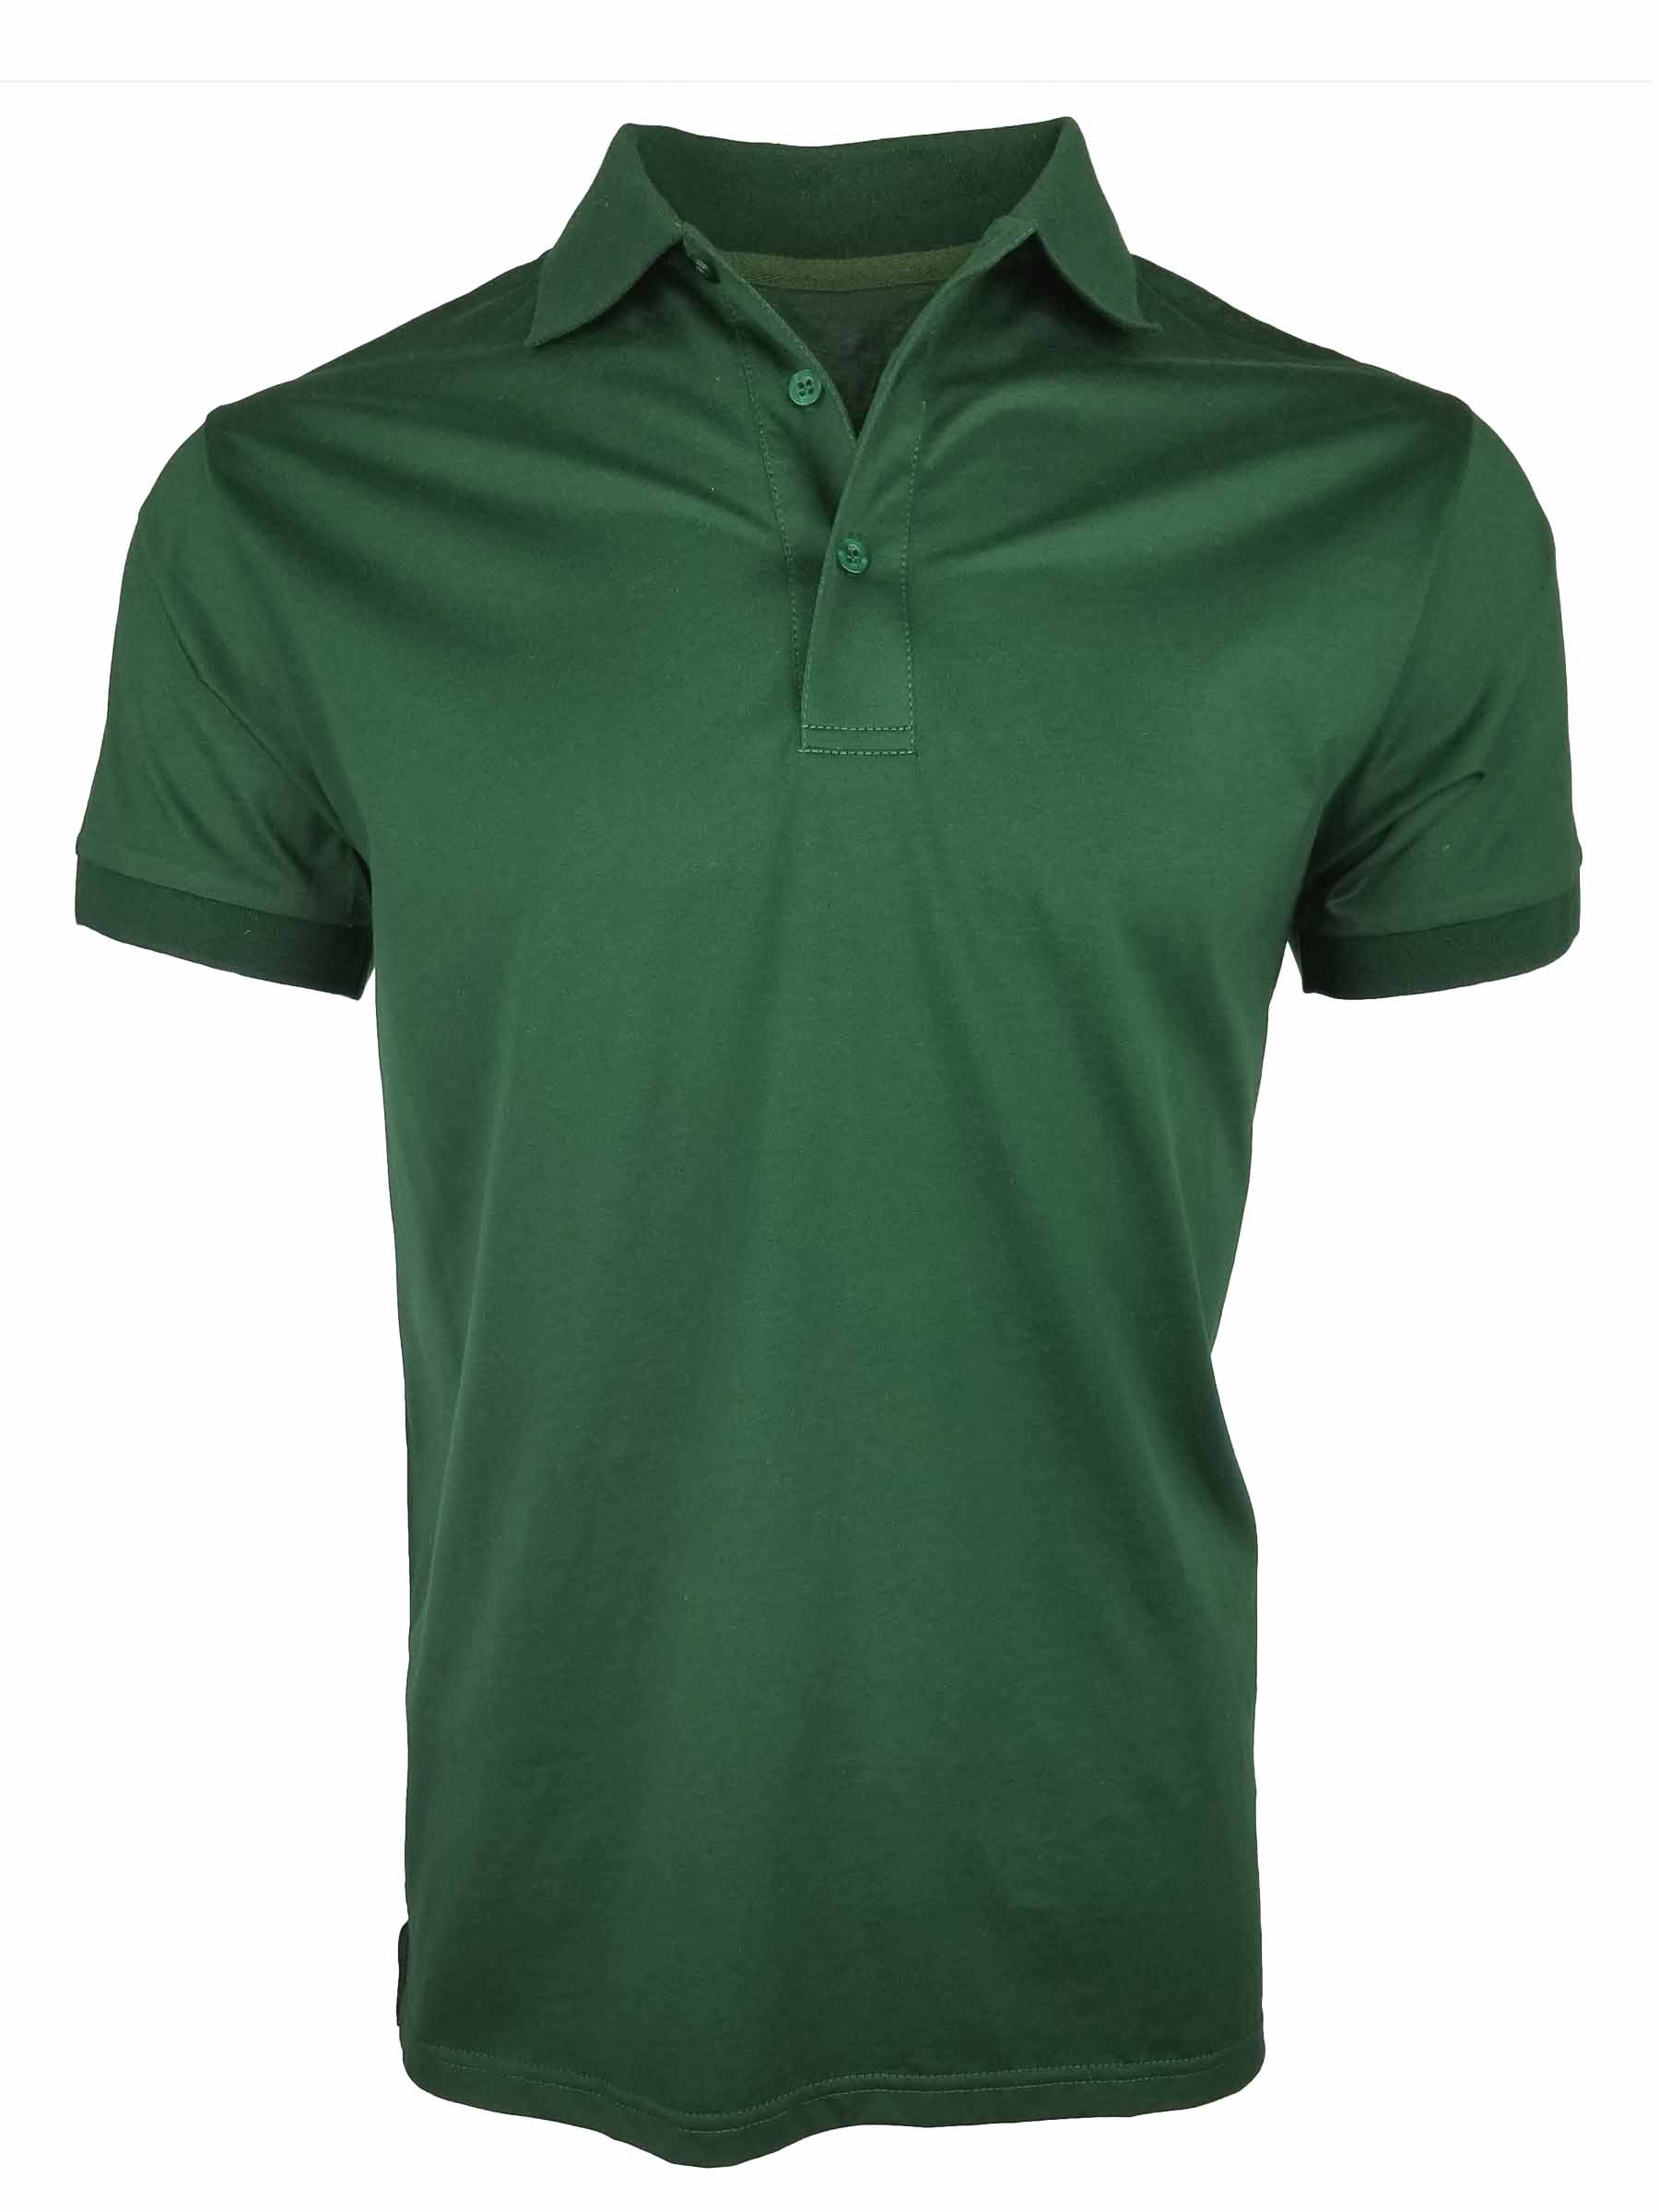 Men's All Occasion Mercerized Polo - Forest Green - Uniform Edit